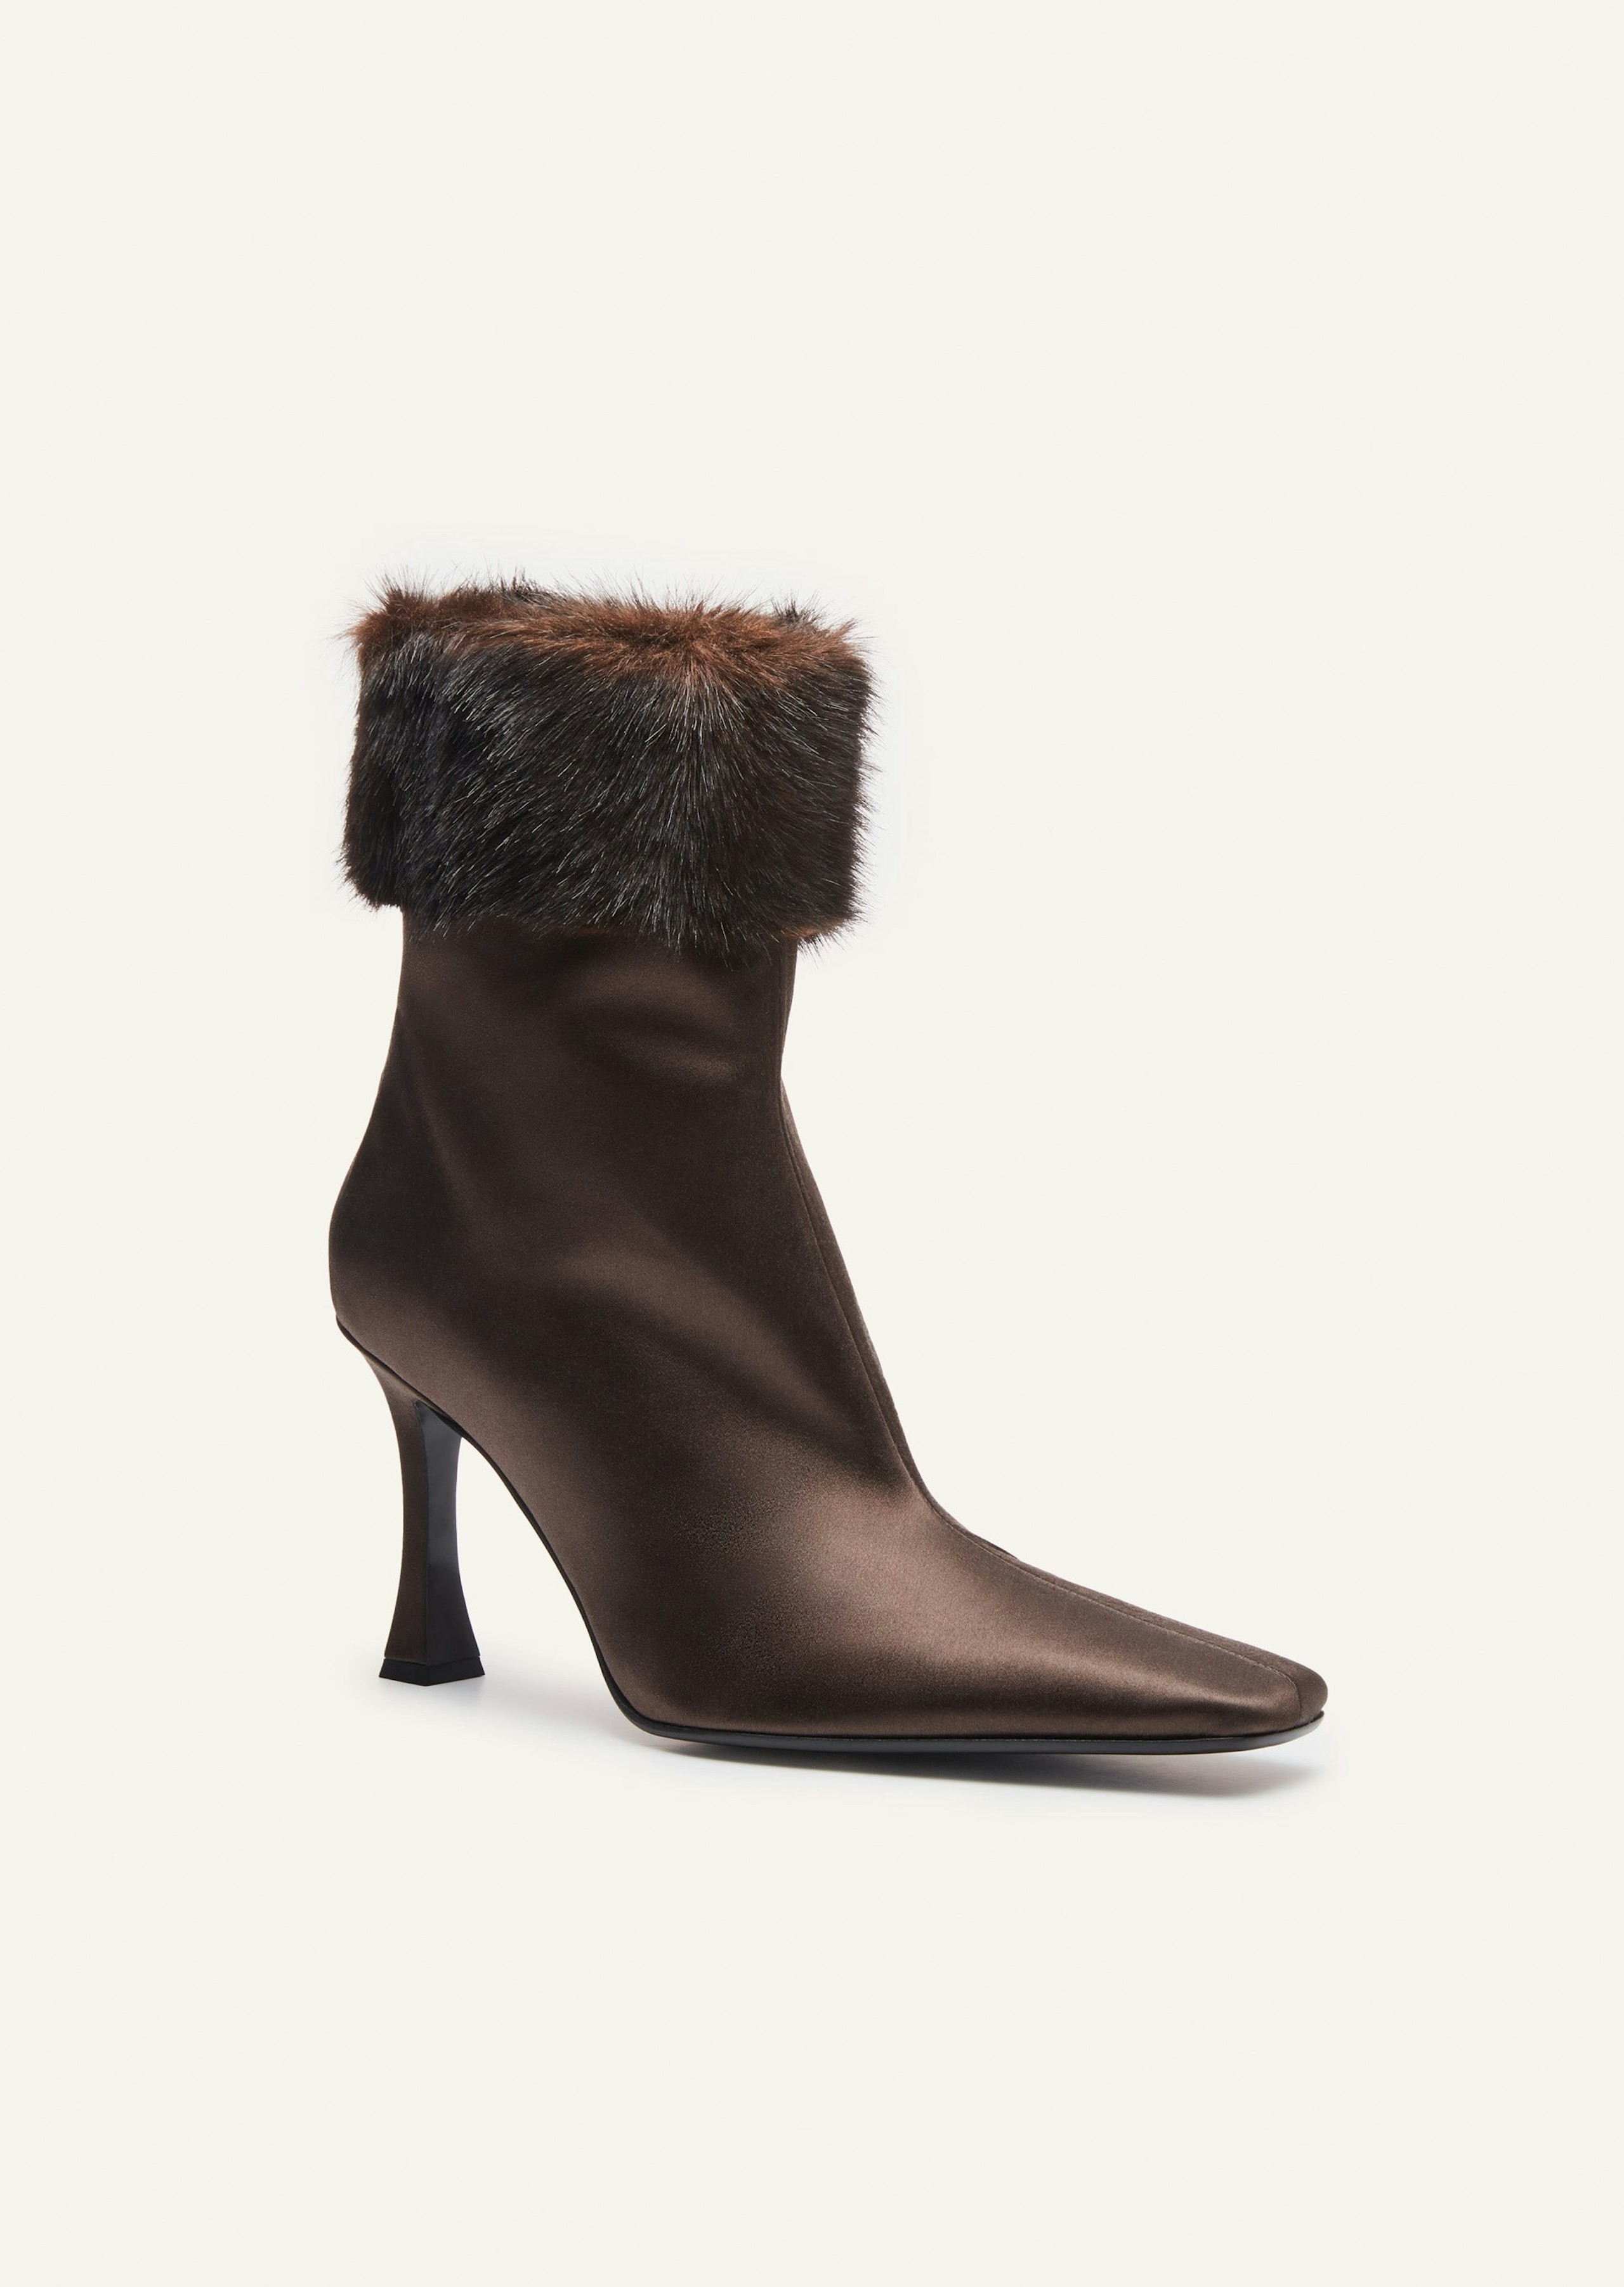 AW23 ANKLE BOOTS SATIN BROWN FAUX FUR